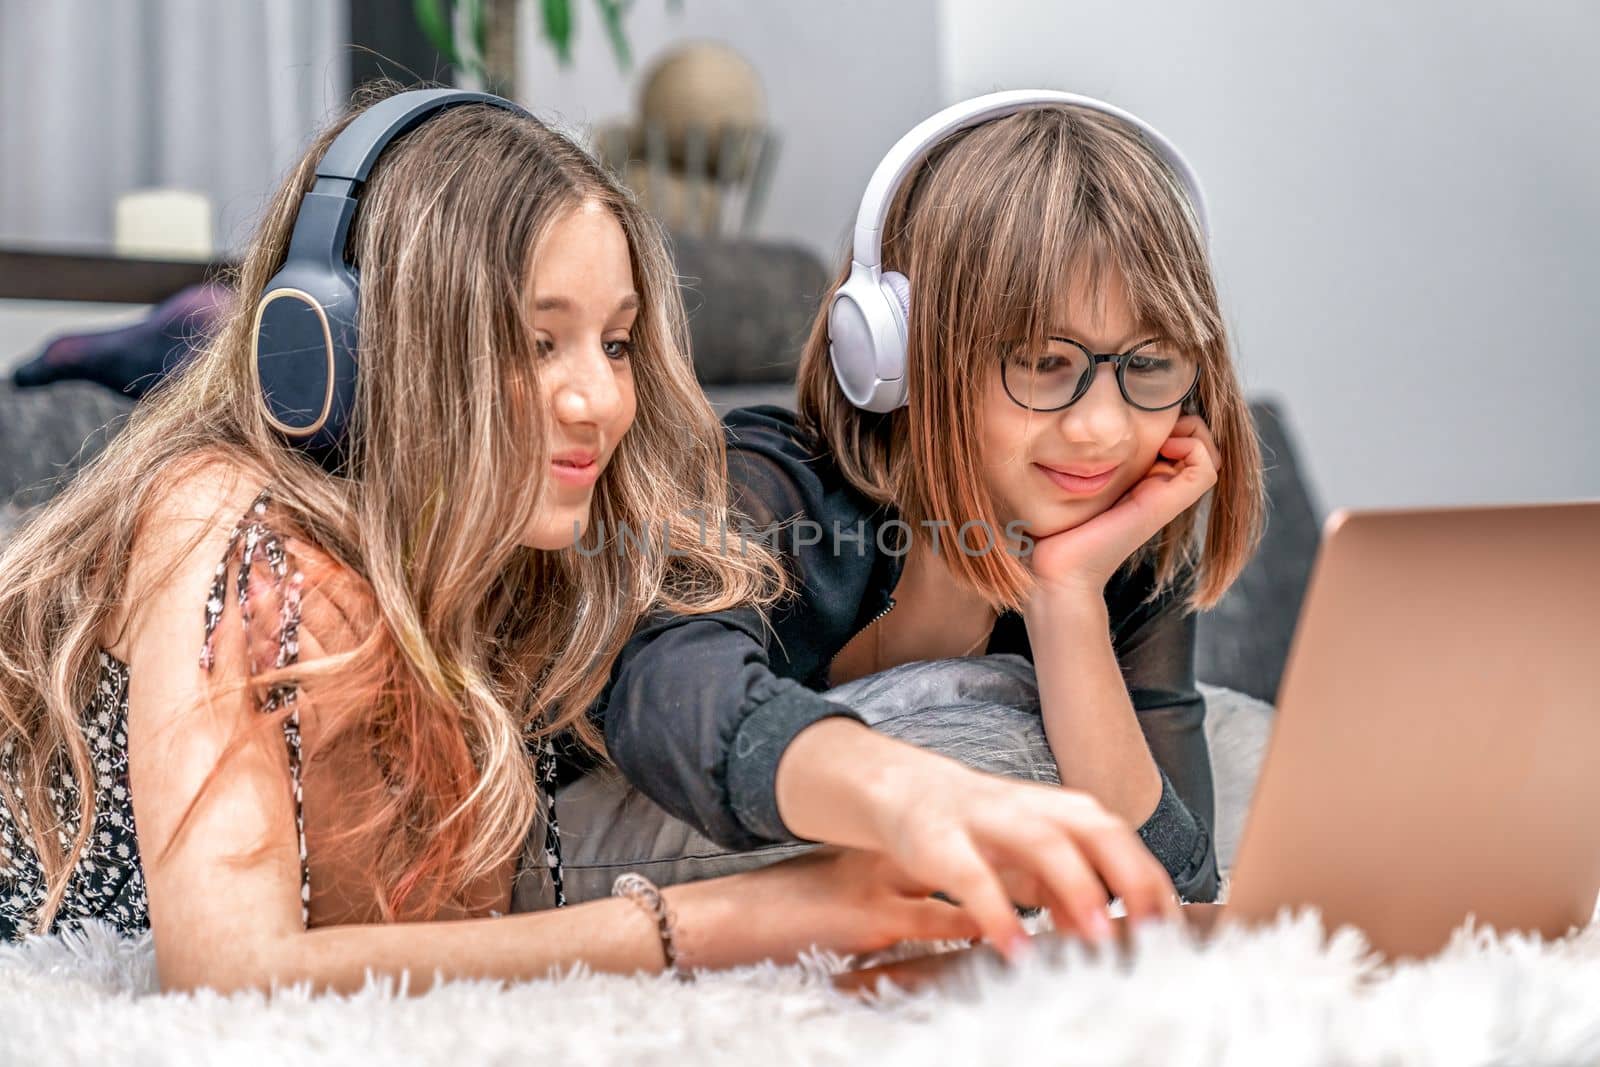 children with wireless headphones on their heads enjoy internet entertainment online on a laptop at home by Edophoto